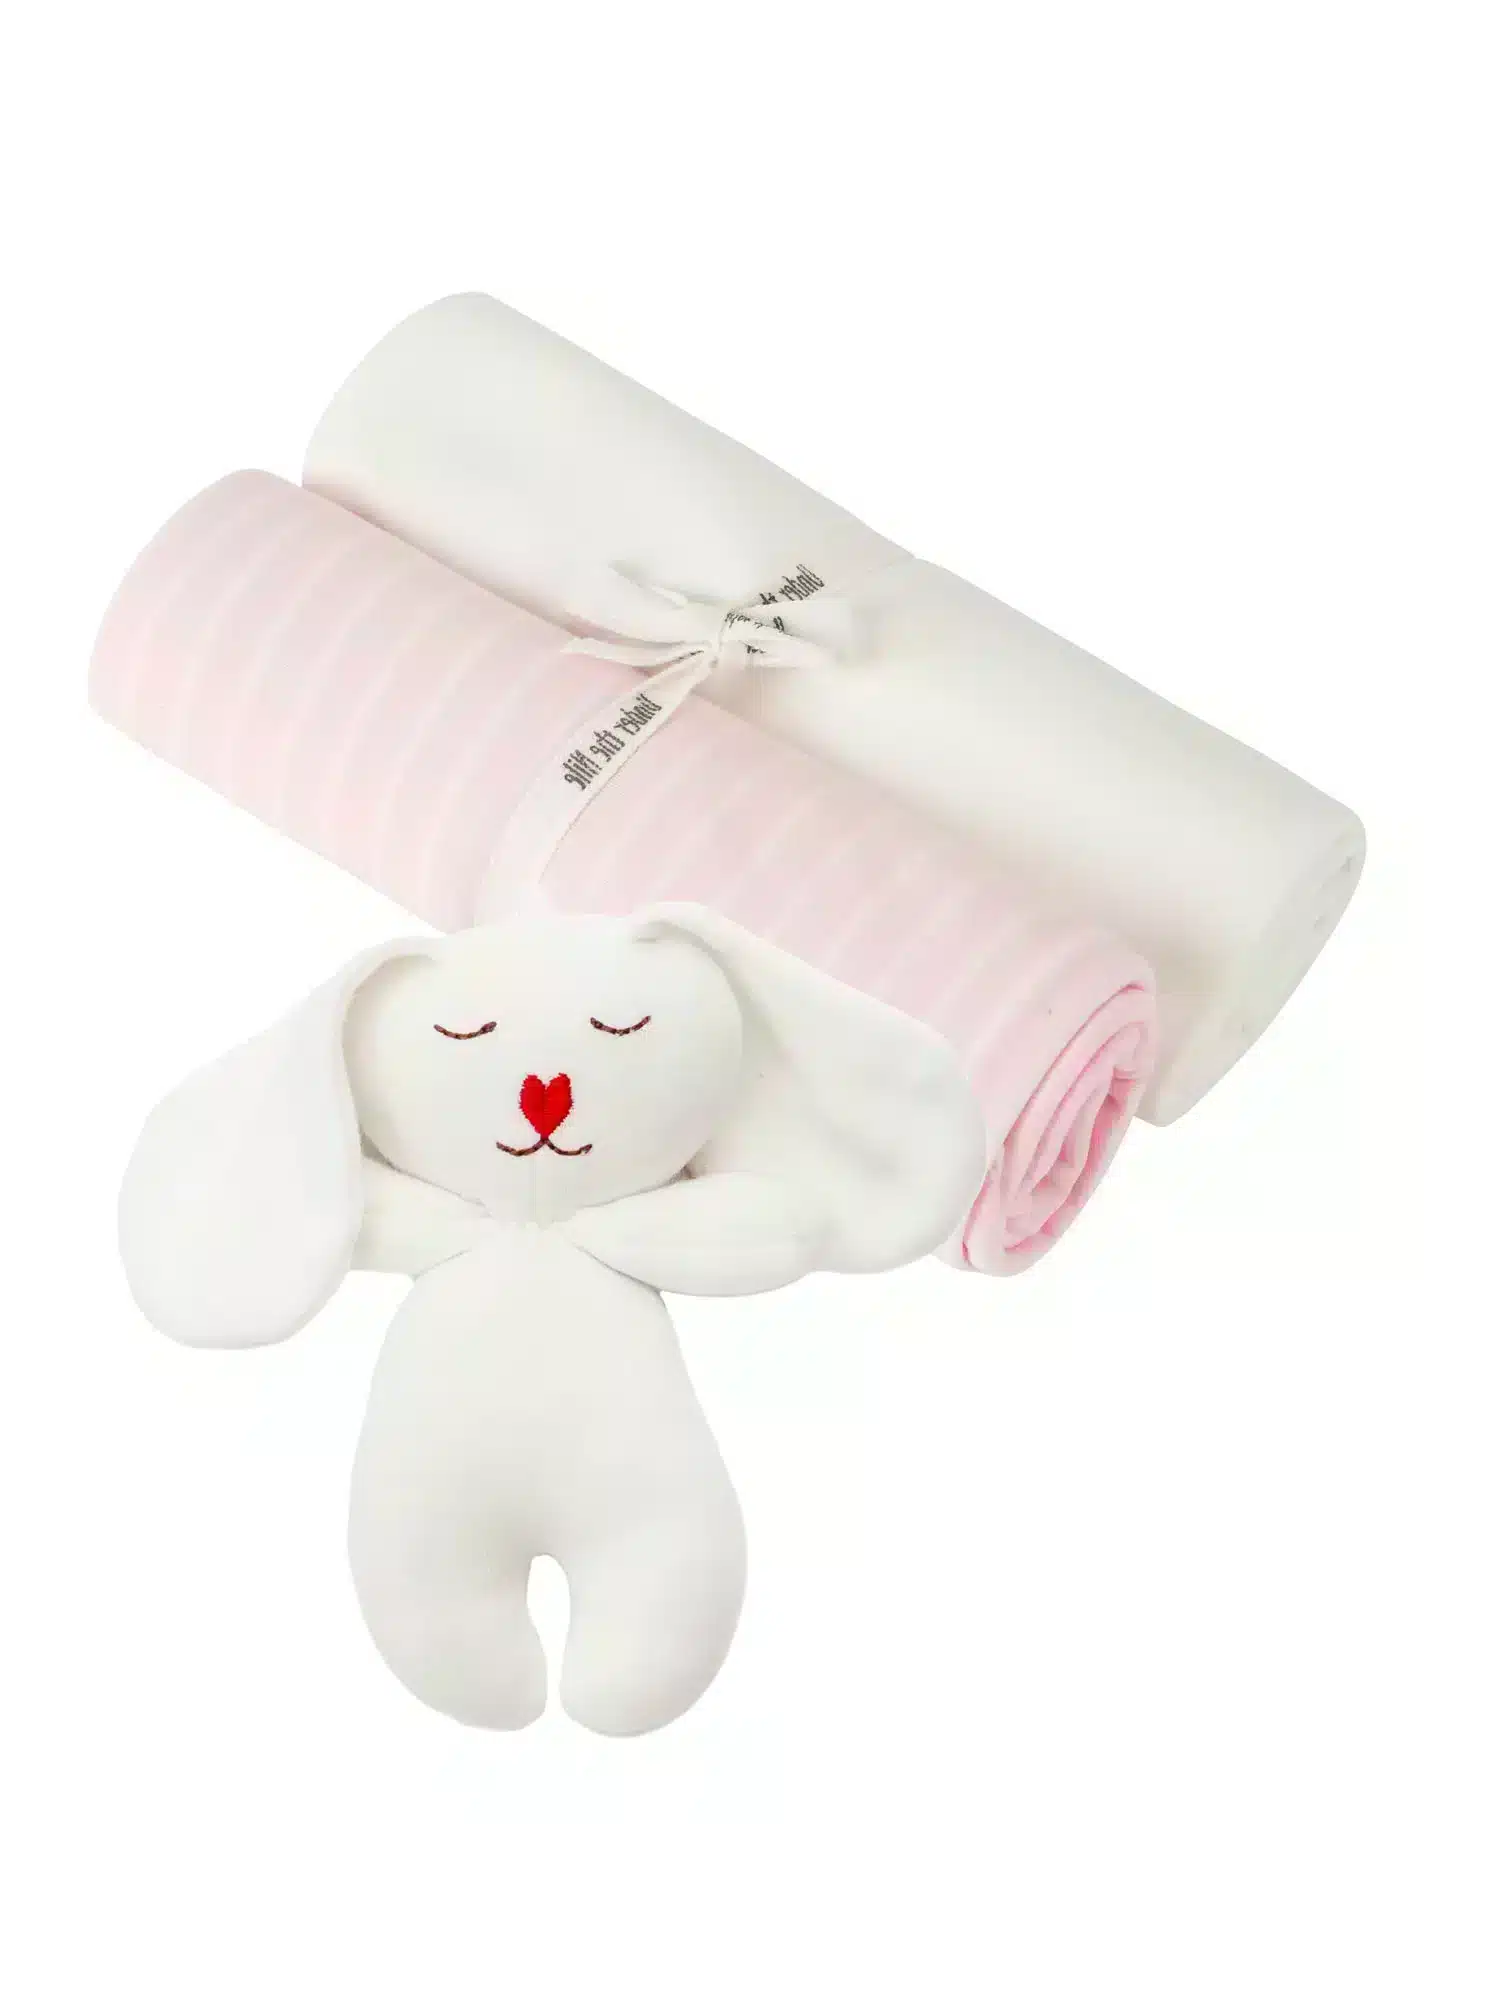 Under the Nile Pink Swaddle Set And Binky Rabbit Toy Gift Set